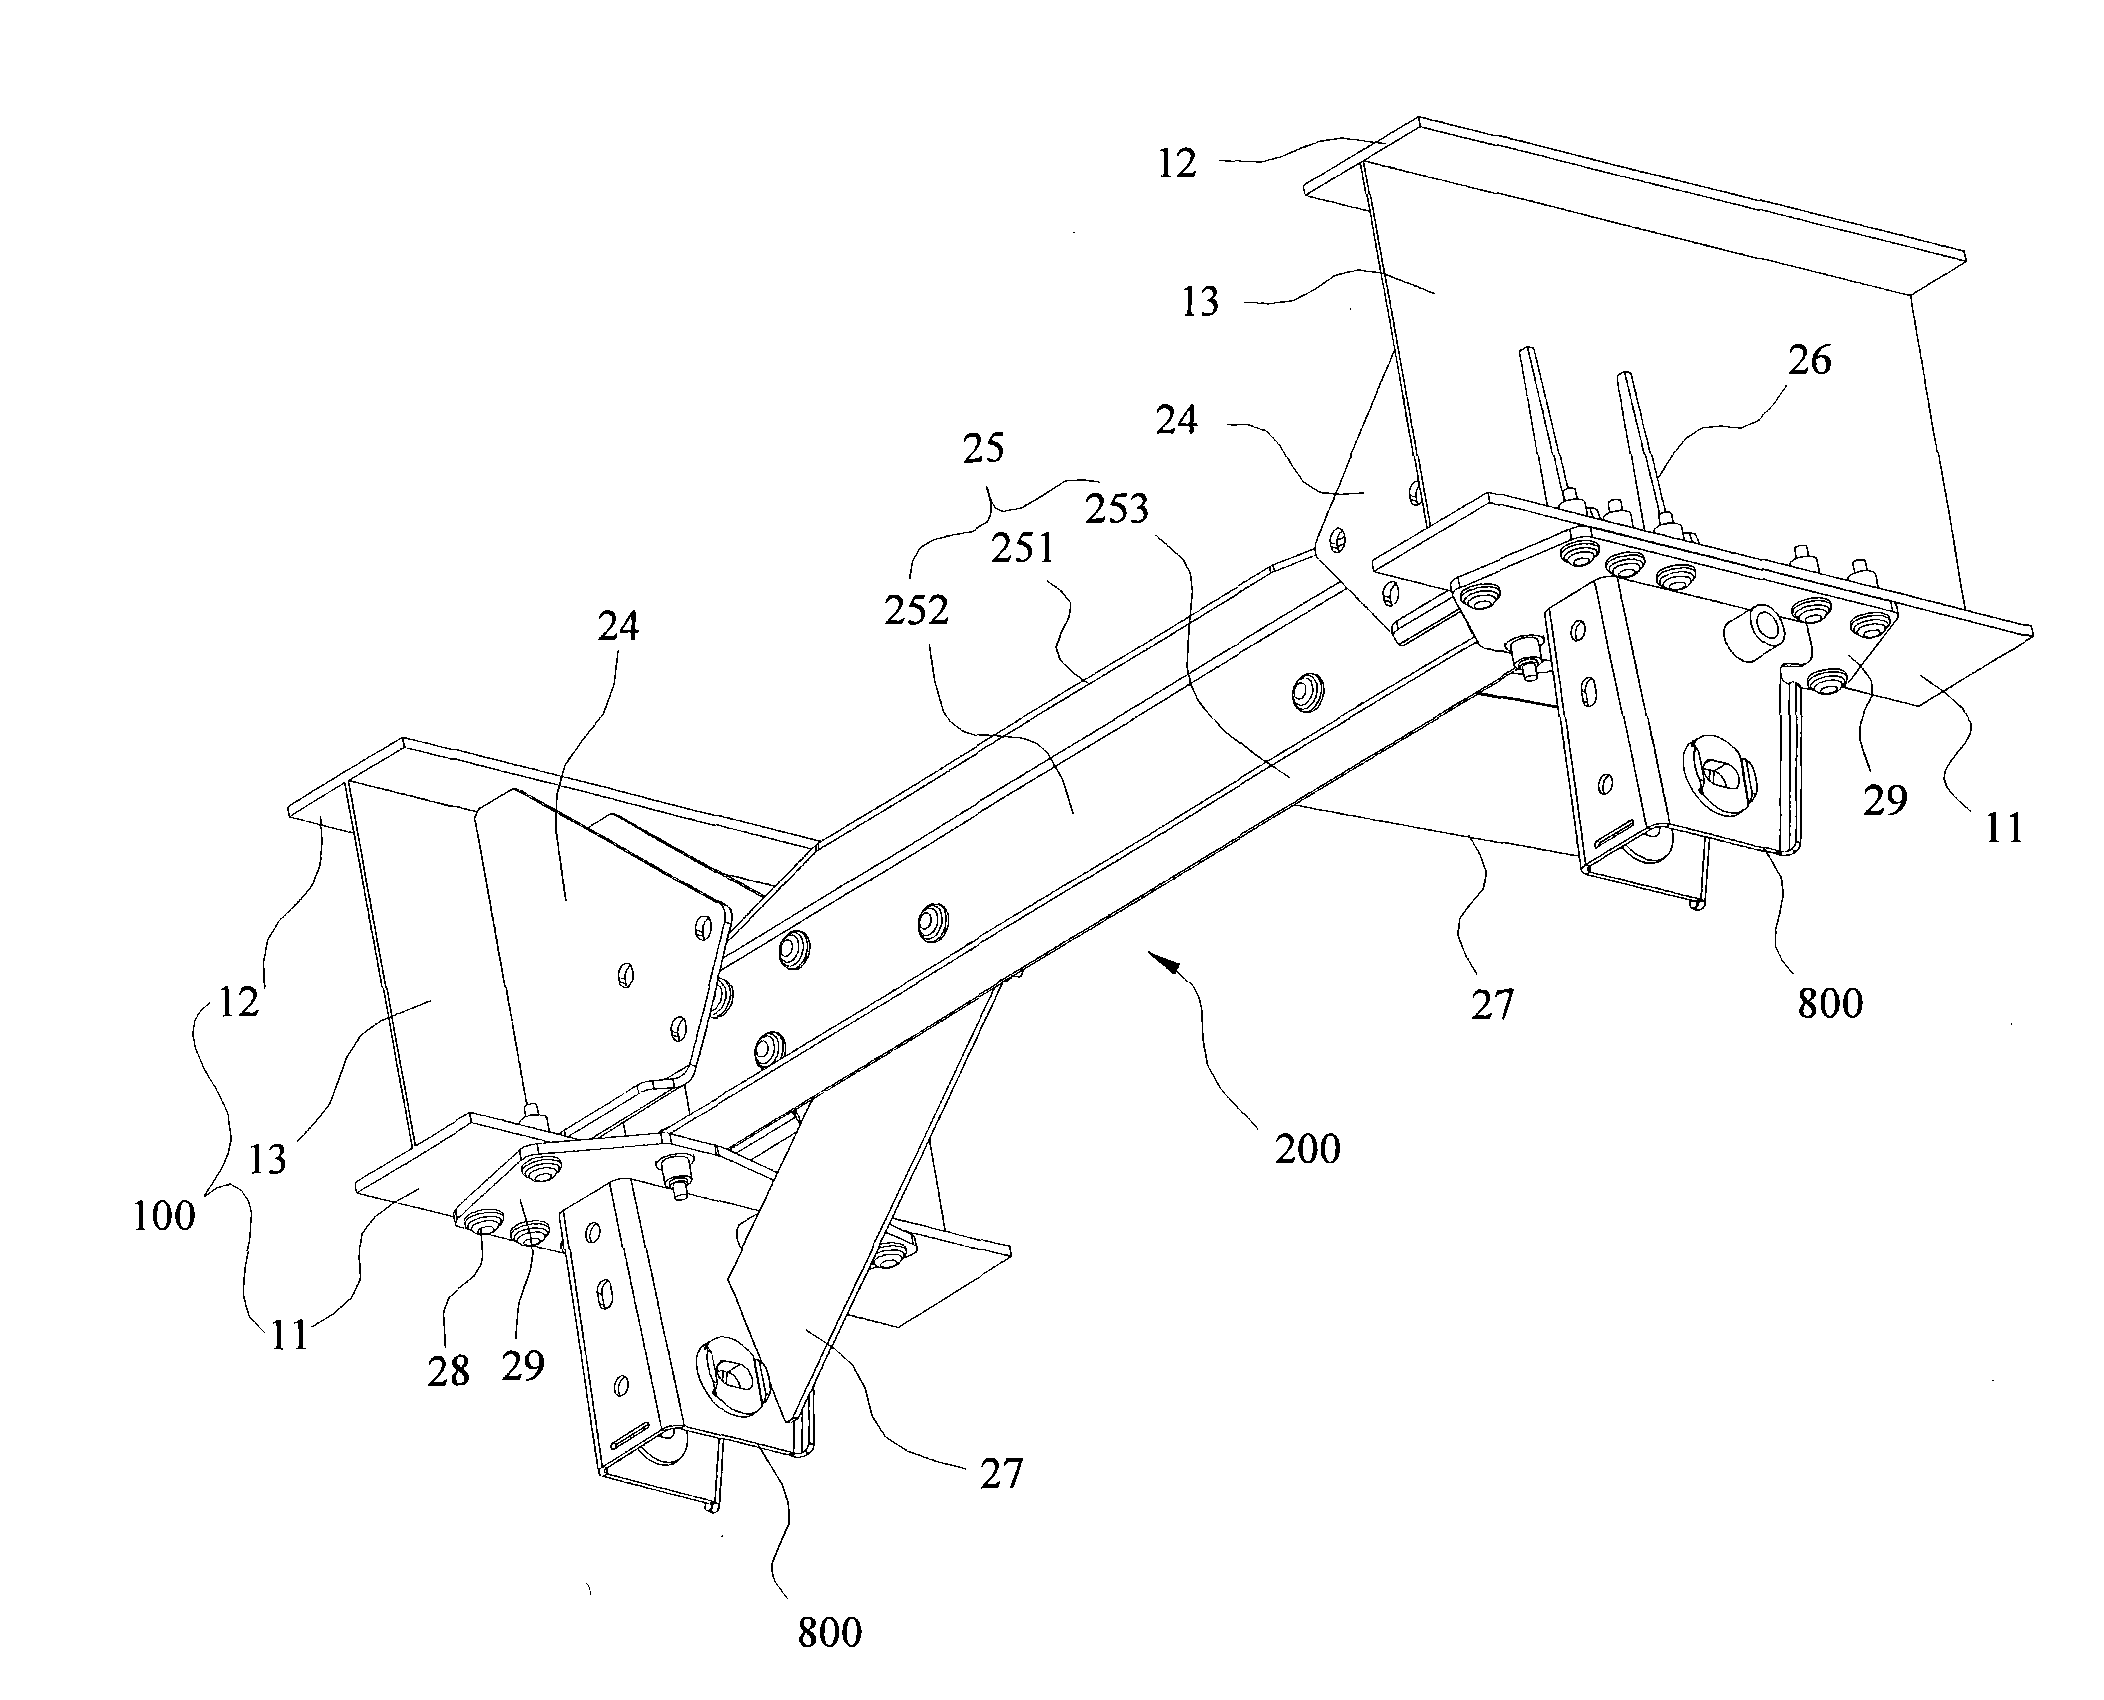 Connecting structure of suspension brackets and frame girders